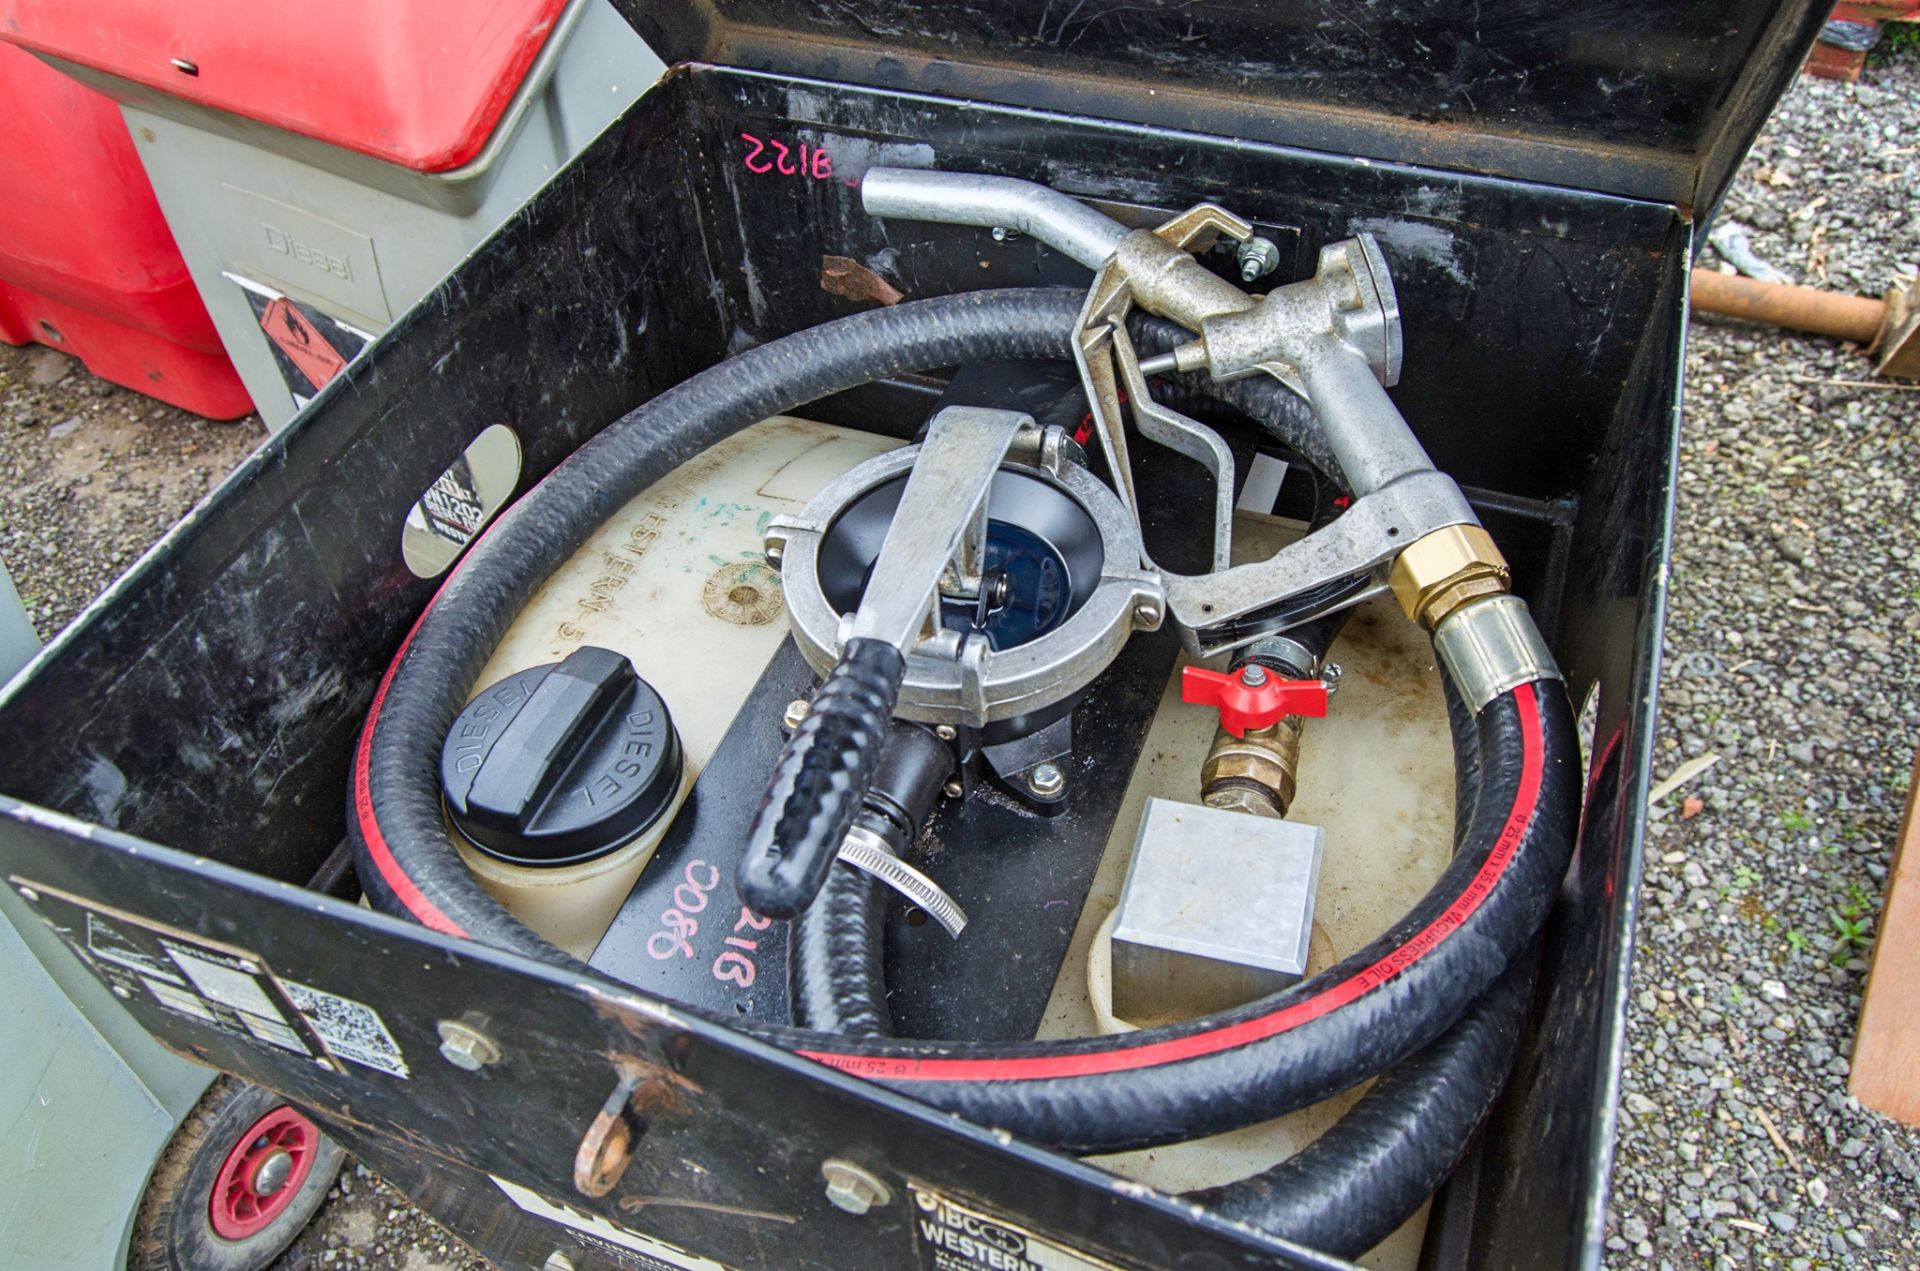 Western Easy Cube 105 litre bunded fuel bowser c/w manual pump, delivery hose & nozzle 221B0086 - Image 2 of 2